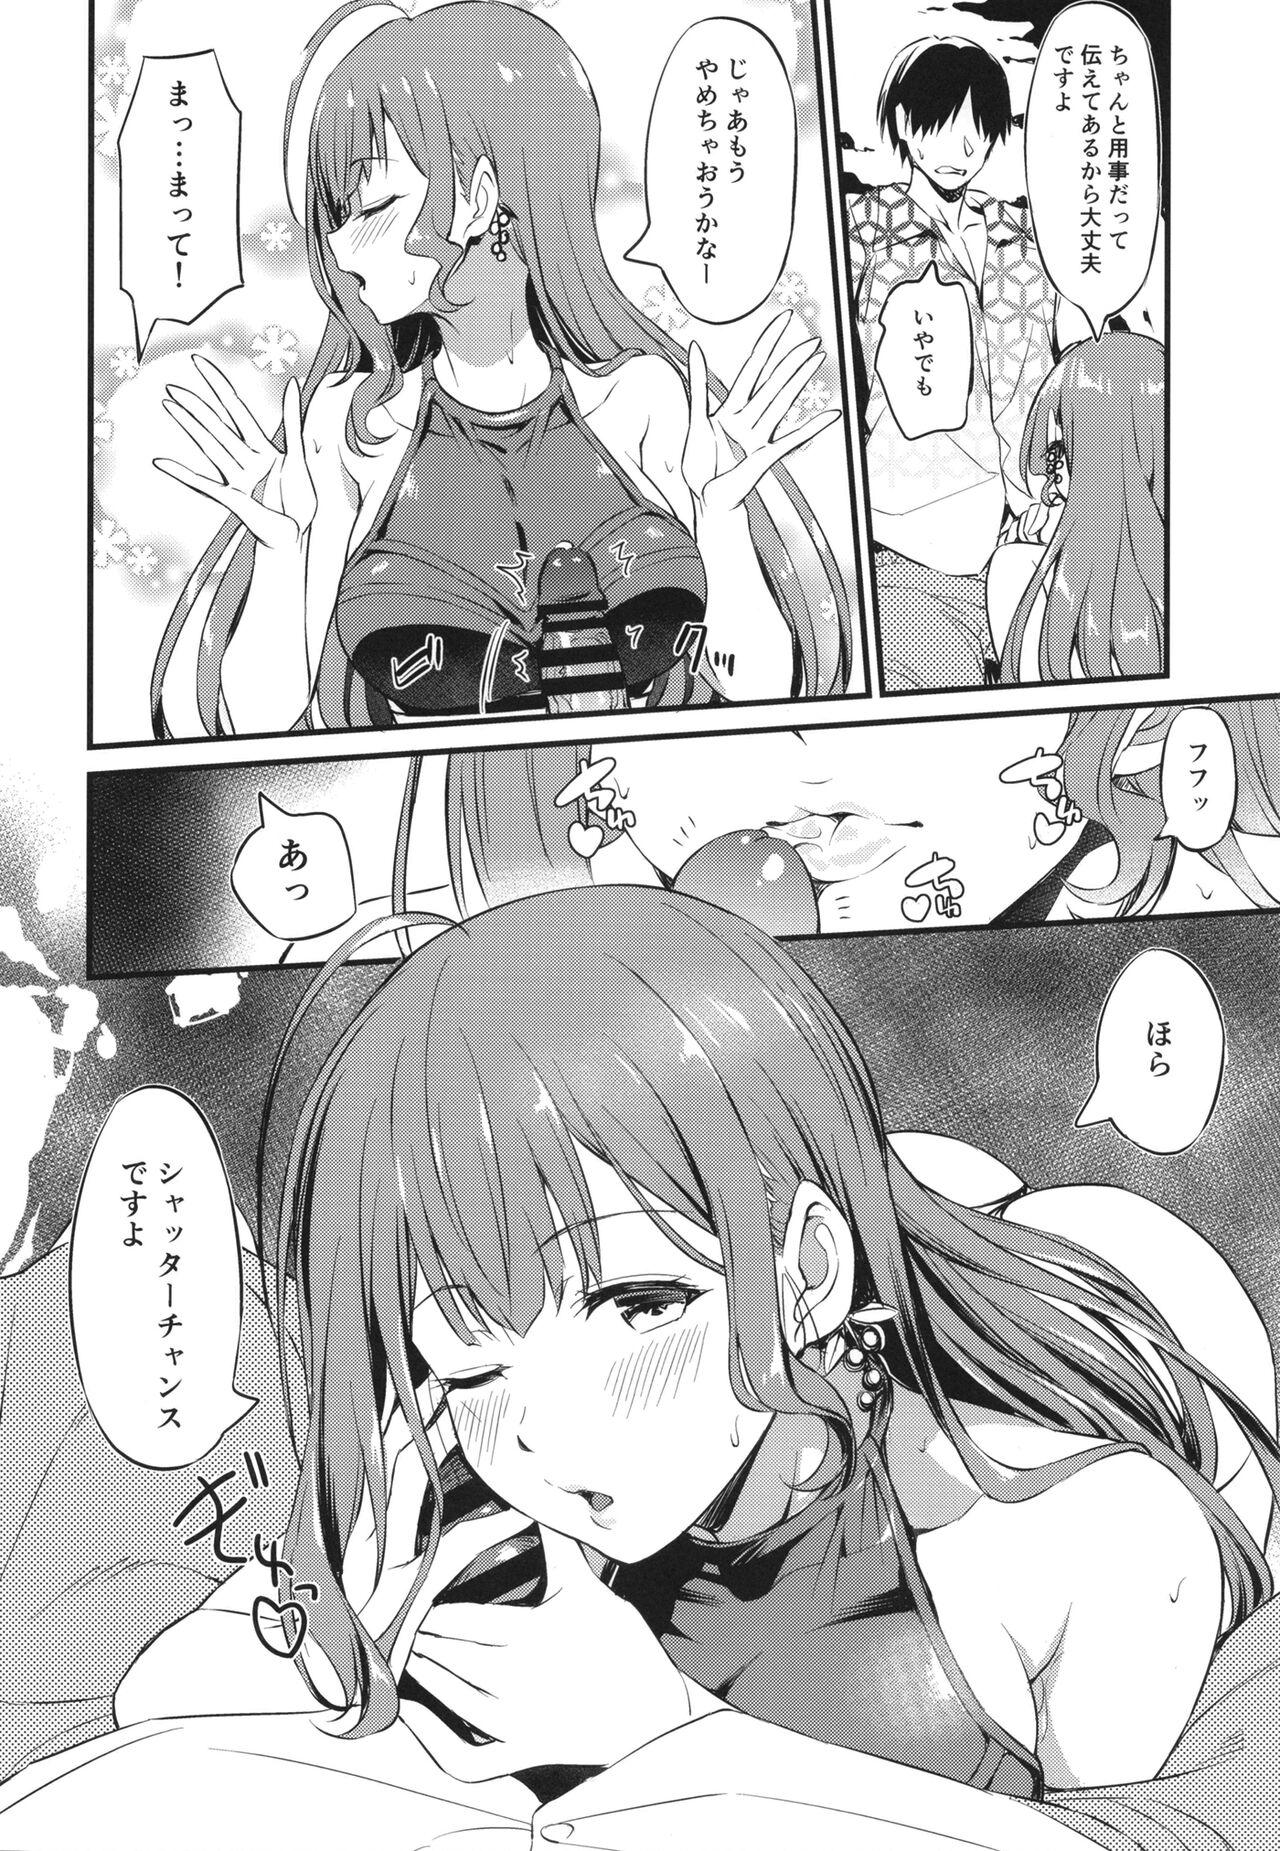 Special Locations 千雪さんのエッチな撮影会 - The idolmaster Parties - Page 8